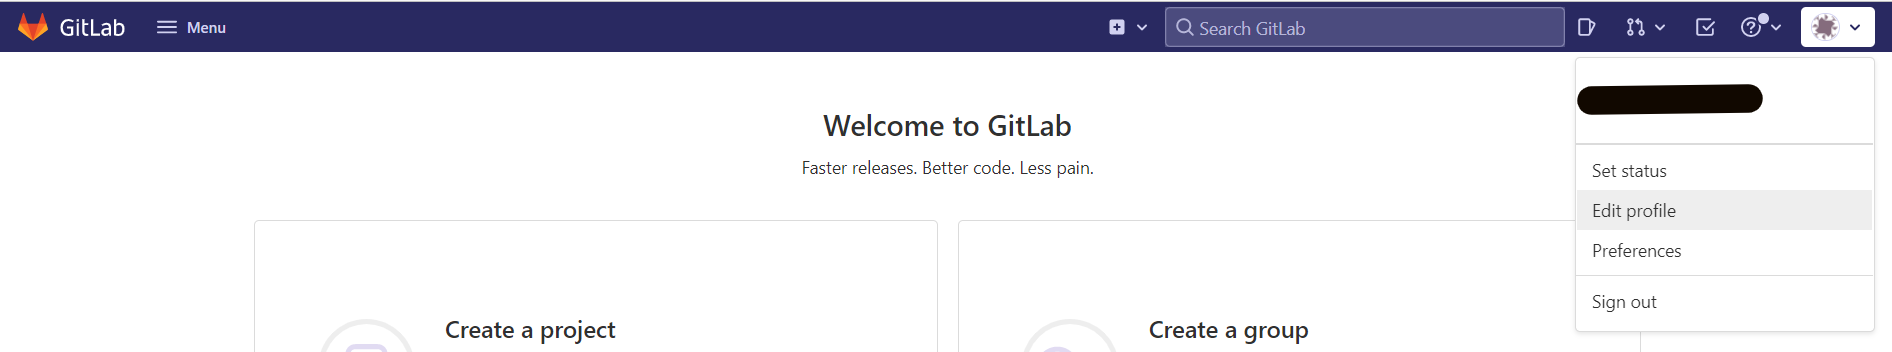 GitLab for Managing Projects 1